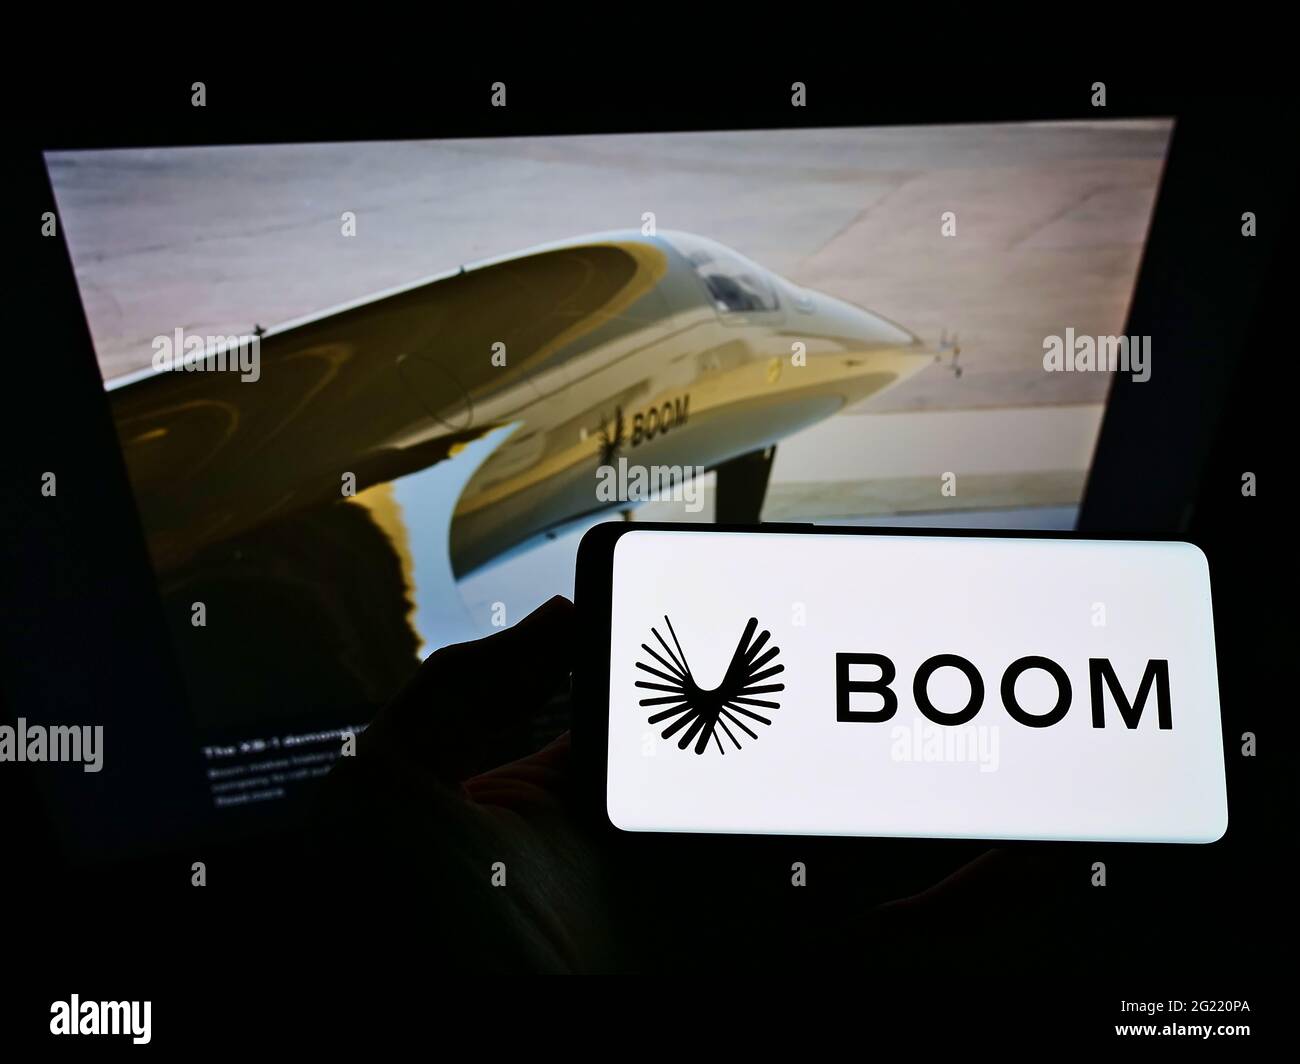 Person holding mobile phone with logo of US aerospace company Boom Technology Inc (Supersonic) on screen in front of webpage. Focus on phone display. Stock Photo